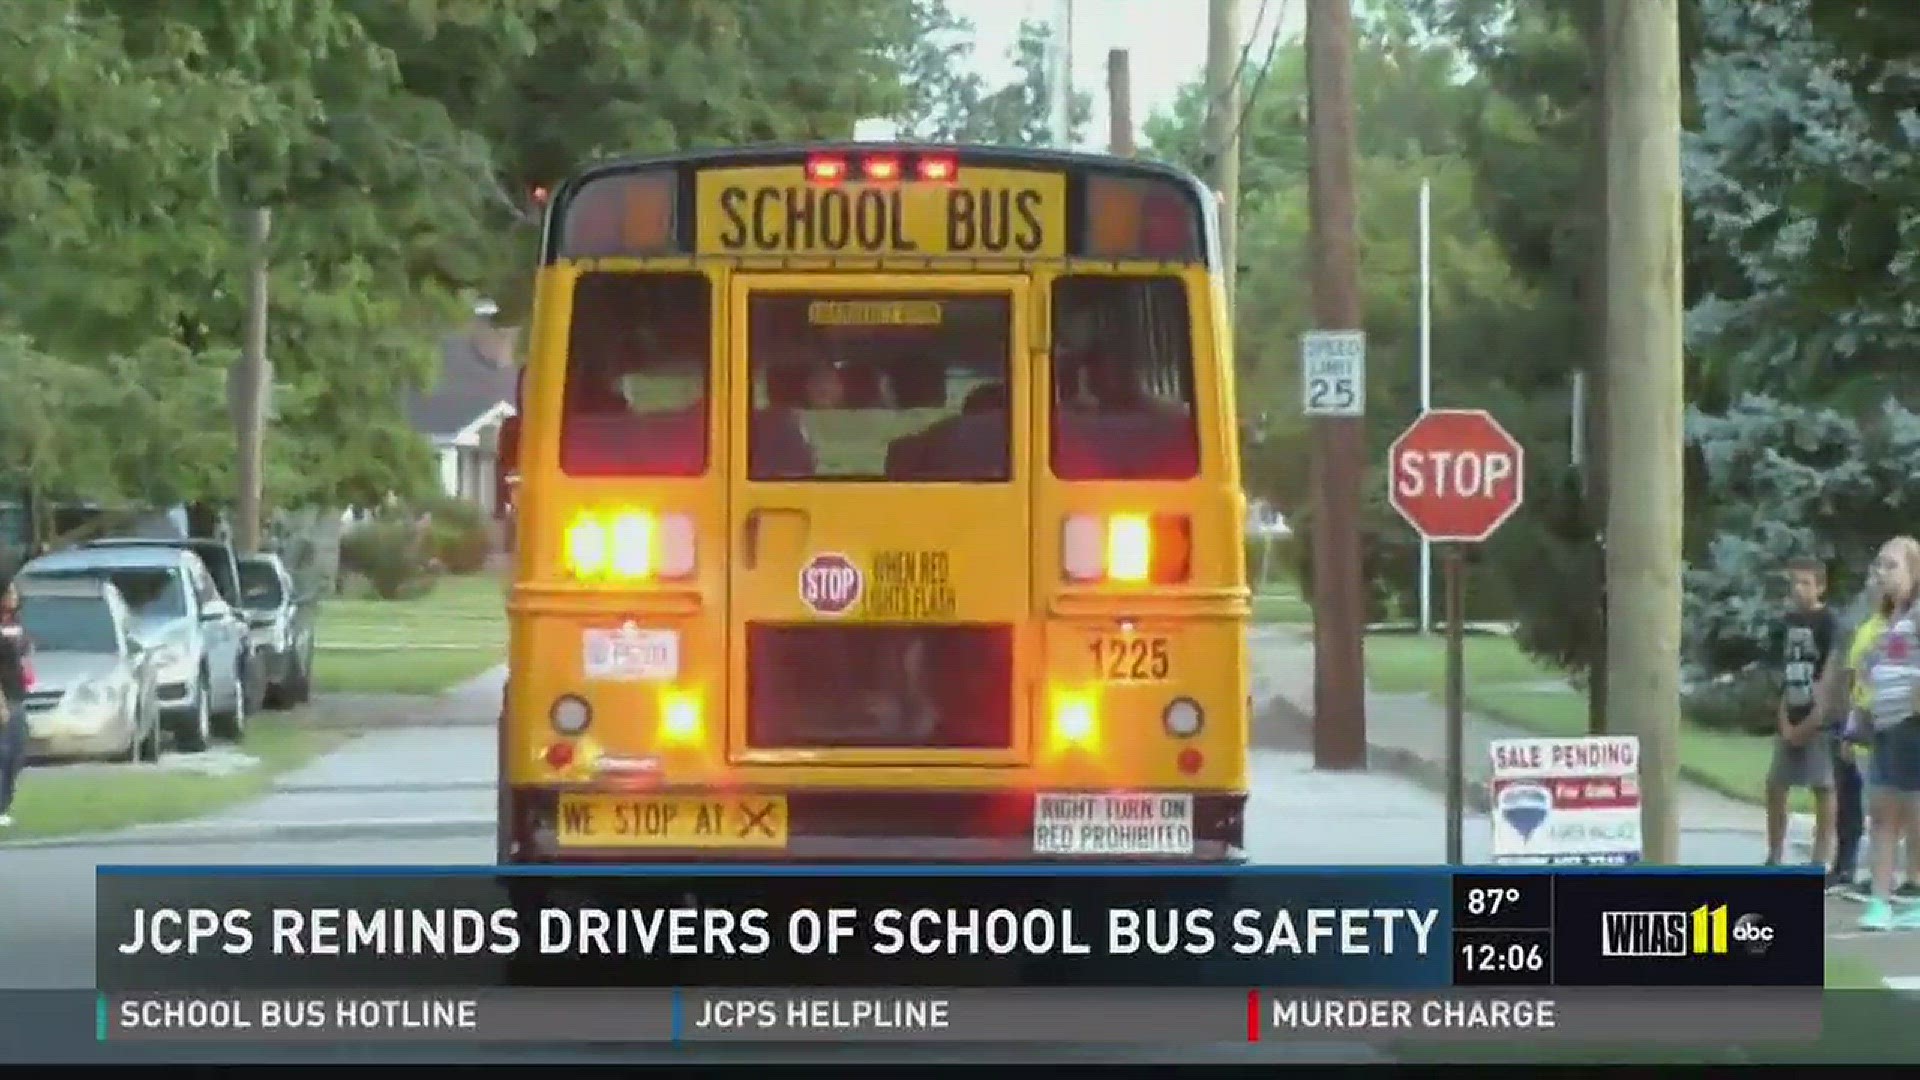 School Bus X Video - JCPS reminds drivers of school bus safety | whas11.com